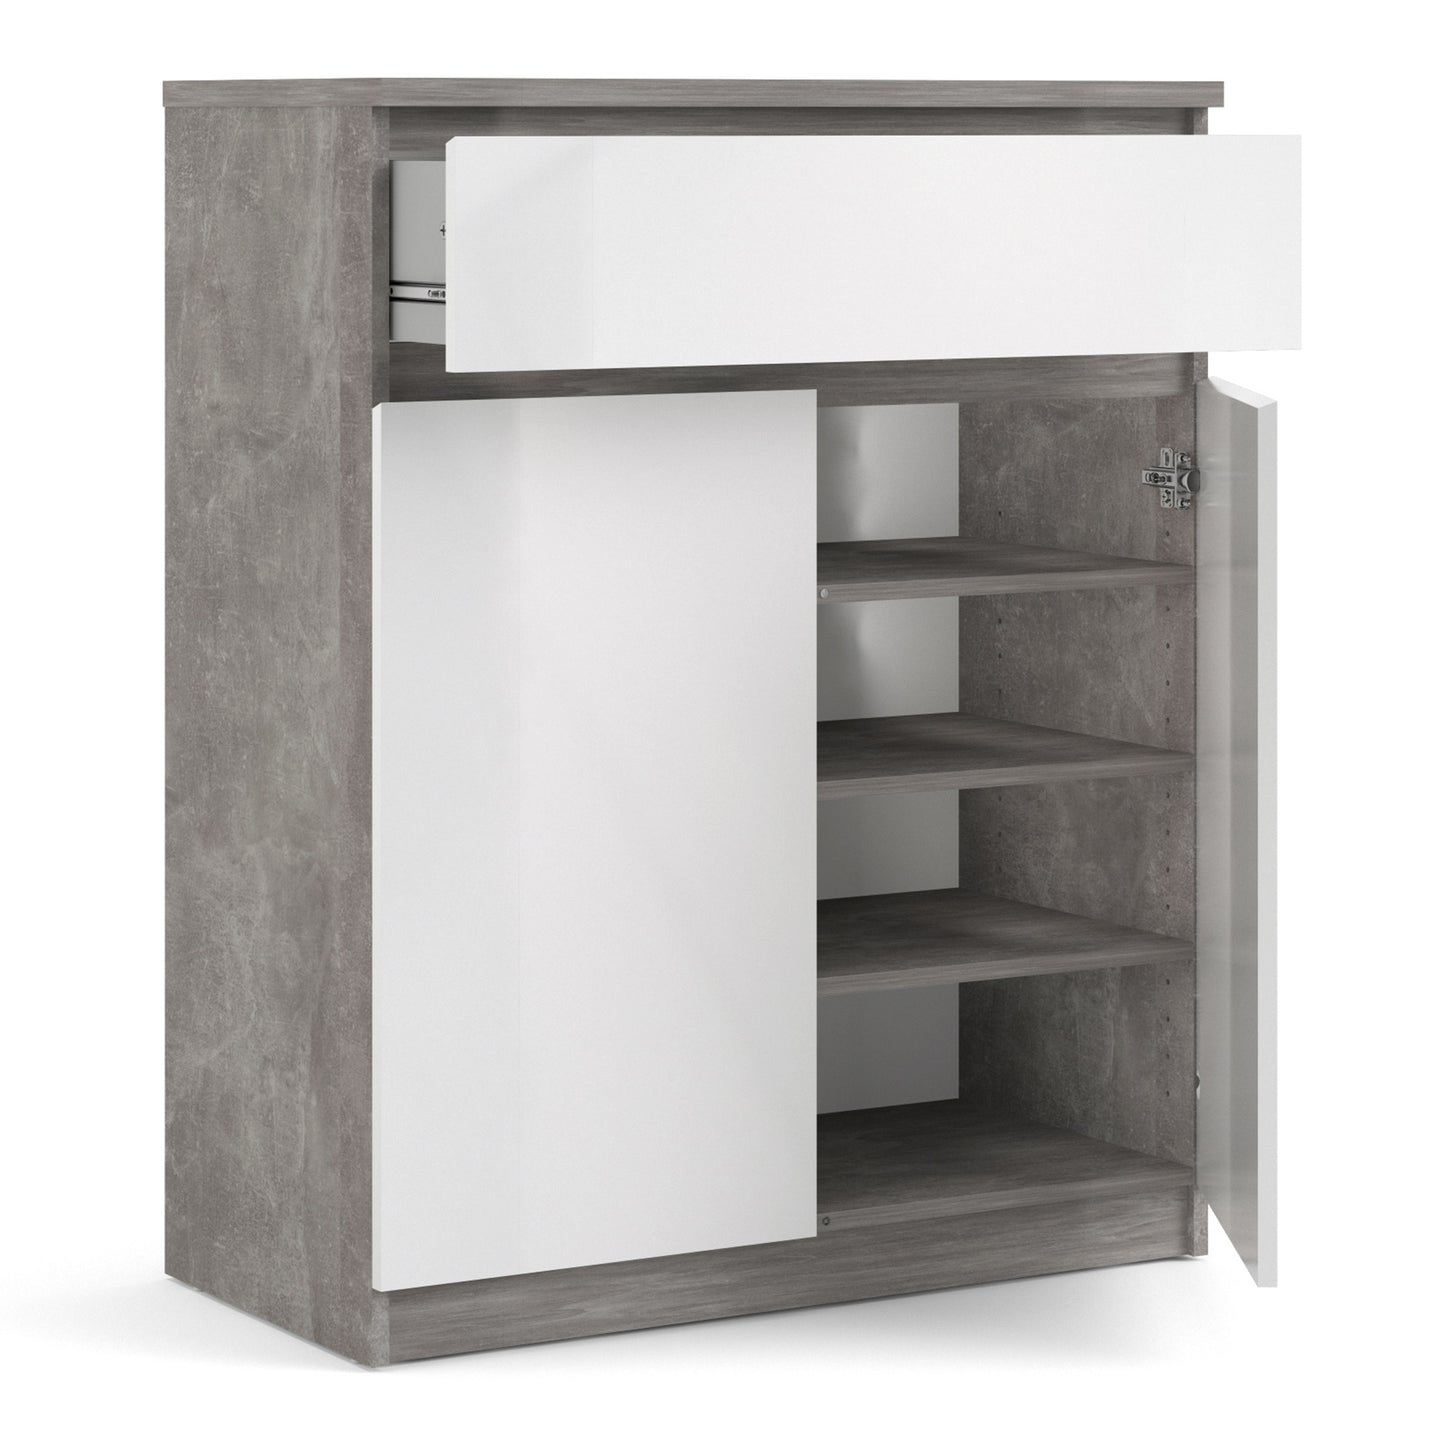 Naia  Sideboard 1 Drawer 2 Doors in Concrete and White High Gloss